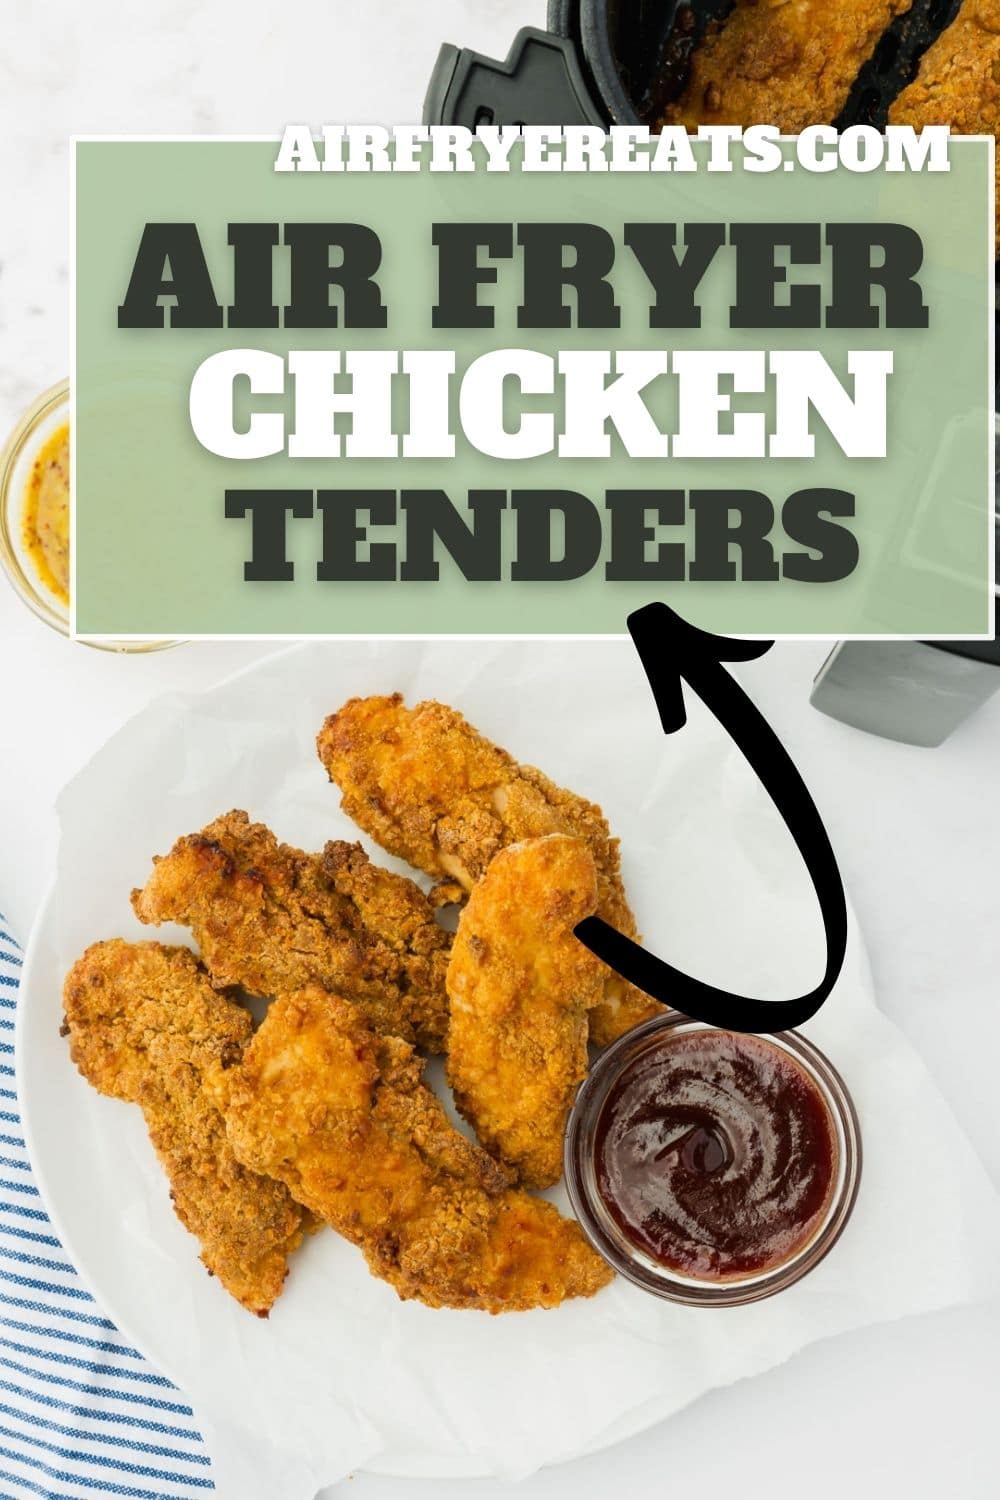 Chicken tenders aren't just a restaurant menu appetizer anymore! Make juicy and tender air fryer chicken tenders in only 30 minutes with this easy recipe! via @vegetarianmamma